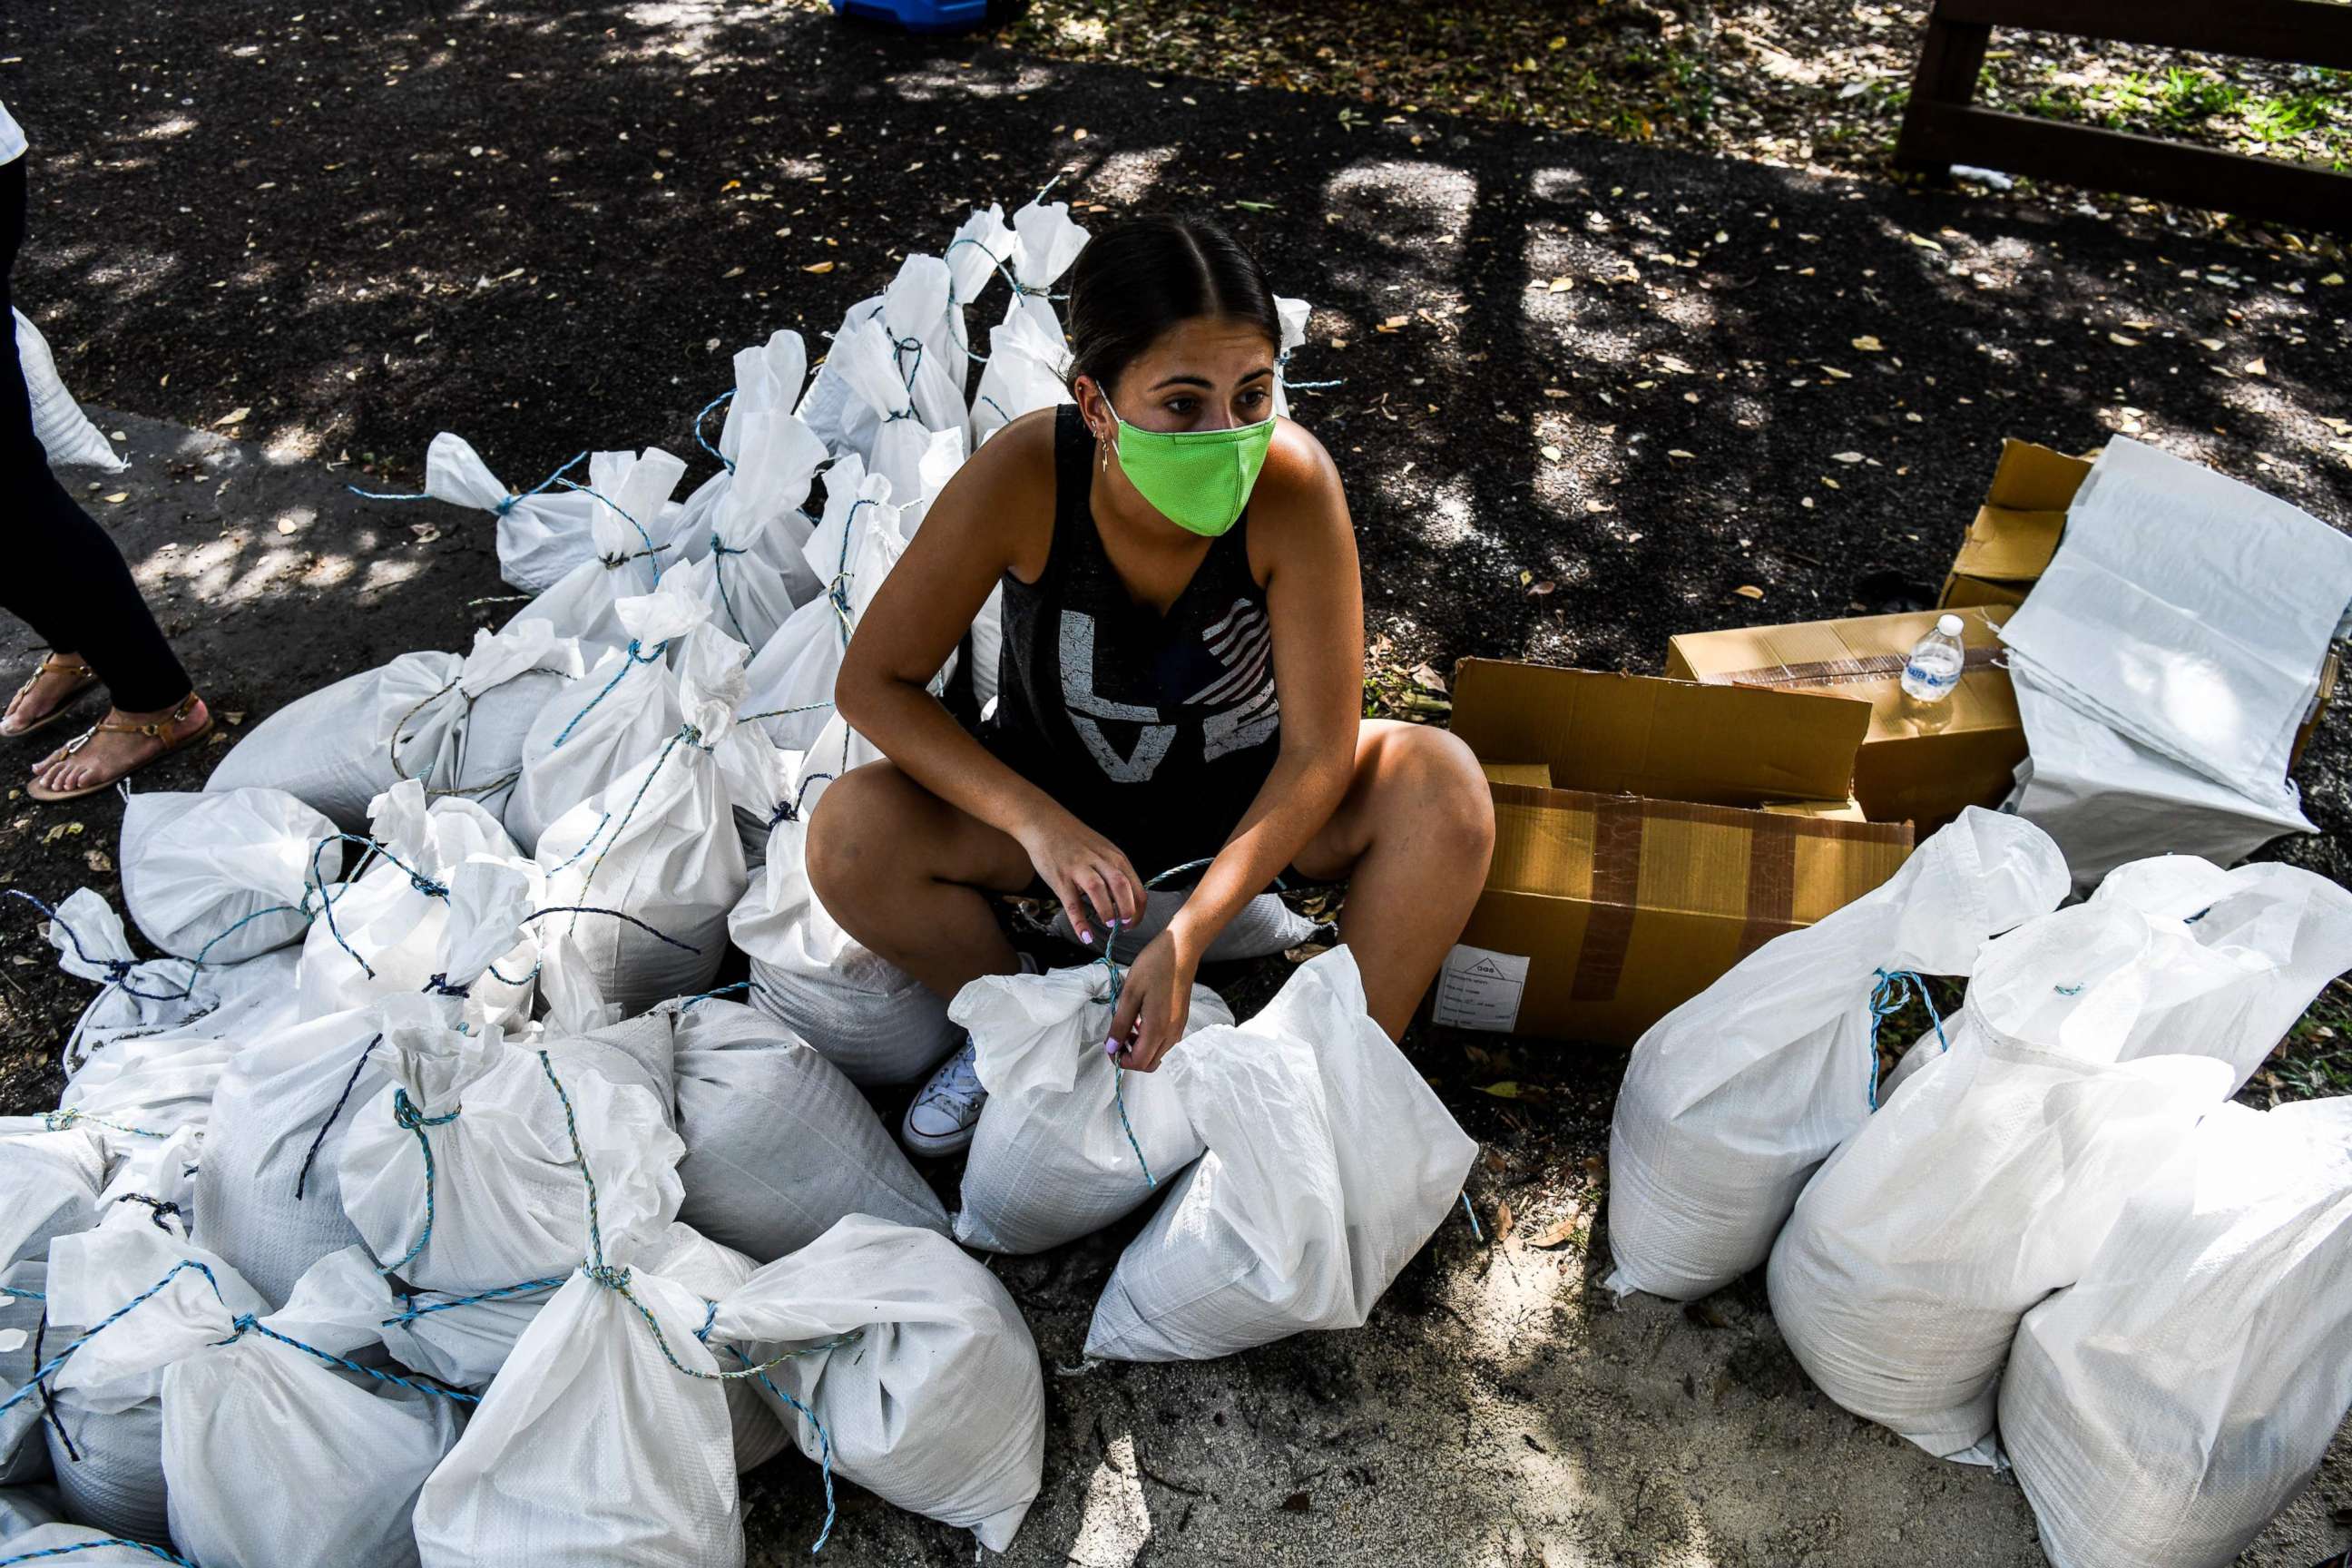 PHOTO: A woman prepares sand bags for distribution to the residents of Palmetto Bay near Miami, on July 31, 2020, as Floridians prepare for Hurricane Isaias.